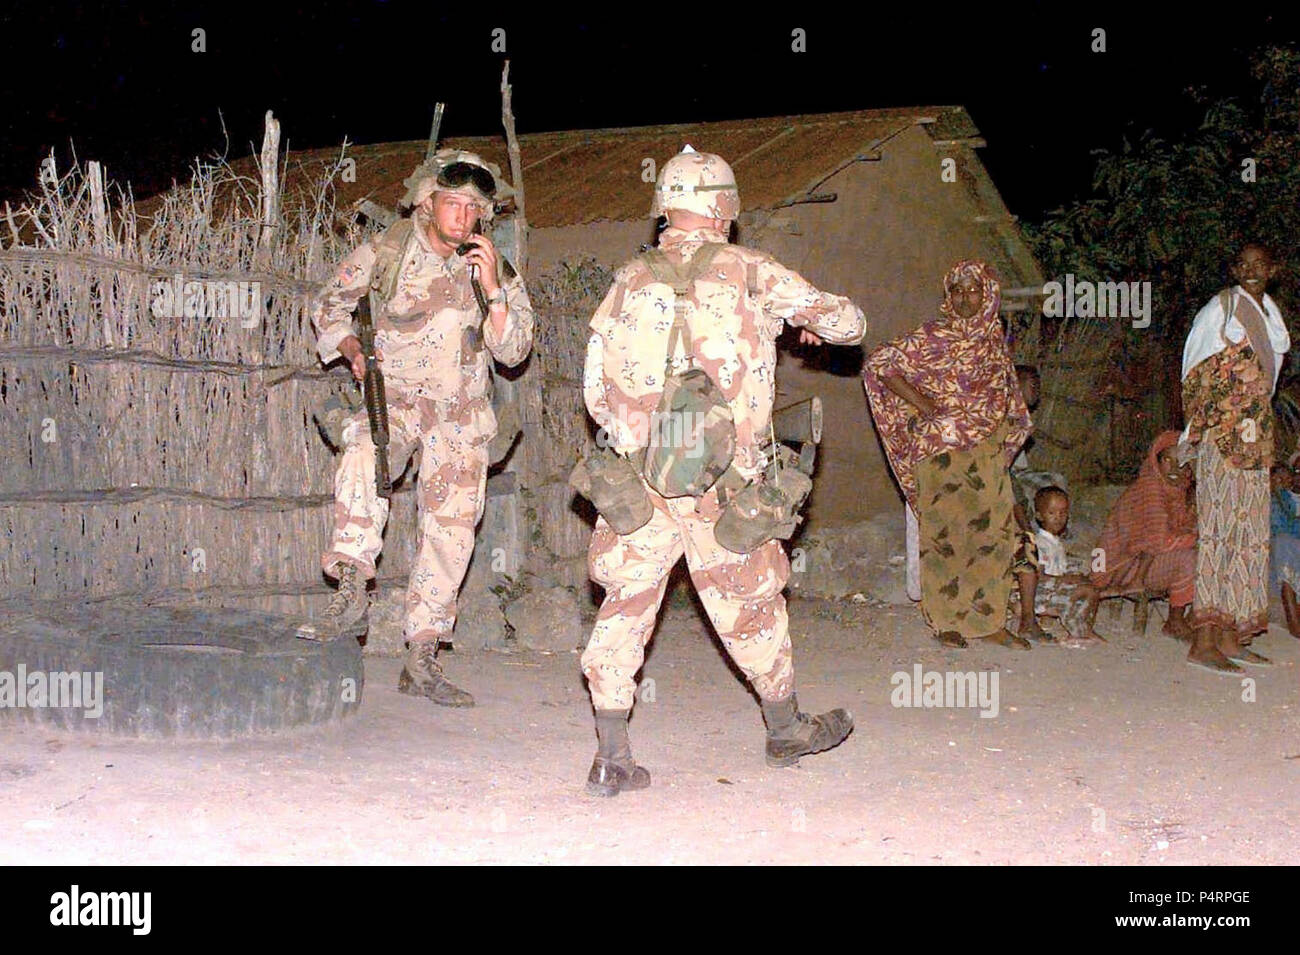 Two US Army troops from the 10th Mountain Division are shown conducting a night time sweep for weapons in the small Somali village of Afgooye.  Some Somali men, women and children are seen at the right.  The 10th Mountain Division from Fort Drum, New York, is deployed to Somalia as part of Operation Restore Hope. Stock Photo